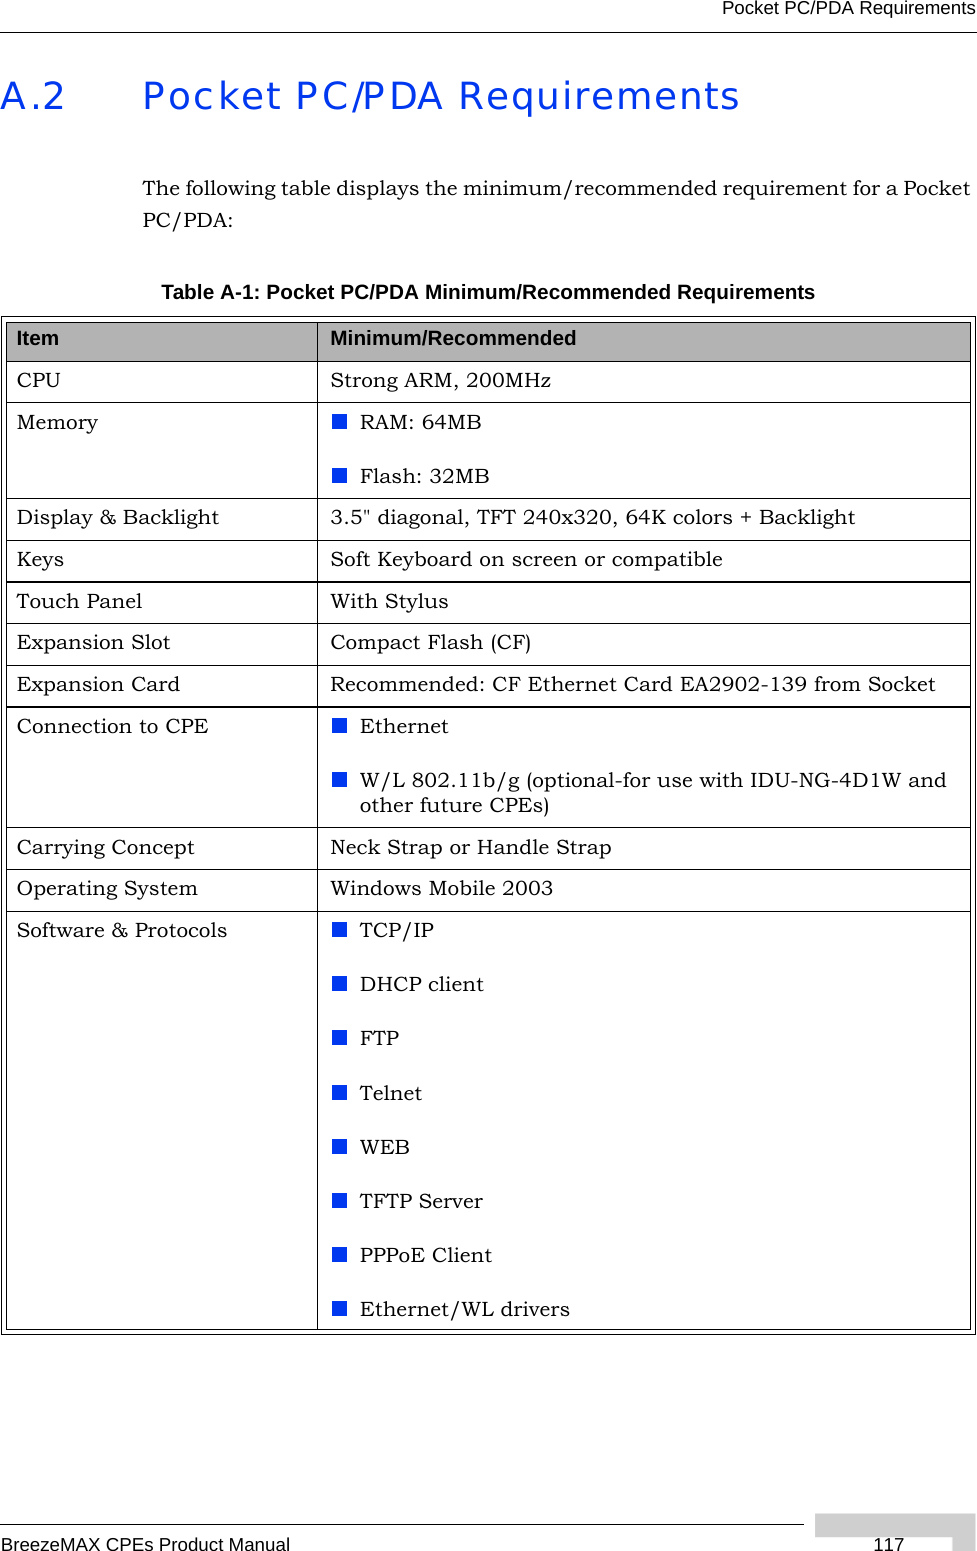 Pocket PC/PDA RequirementsBreezeMAX CPEs Product Manual 117A.2 Pocket PC/PDA RequirementsThe following table displays the minimum/recommended requirement for a Pocket PC/PDA:Table A-1: Pocket PC/PDA Minimum/Recommended RequirementsItem Minimum/RecommendedCPU Strong ARM, 200MHzMemory RAM: 64MBFlash: 32MBDisplay &amp; Backlight 3.5&quot; diagonal, TFT 240x320, 64K colors + BacklightKeys Soft Keyboard on screen or compatibleTouch Panel With StylusExpansion Slot Compact Flash (CF)Expansion Card Recommended: CF Ethernet Card EA2902-139 from SocketConnection to CPE EthernetW/L 802.11b/g (optional-for use with IDU-NG-4D1W and other future CPEs)Carrying Concept Neck Strap or Handle StrapOperating System Windows Mobile 2003Software &amp; Protocols TCP/IPDHCP clientFTPTelnetWEBTFTP ServerPPPoE ClientEthernet/WL drivers